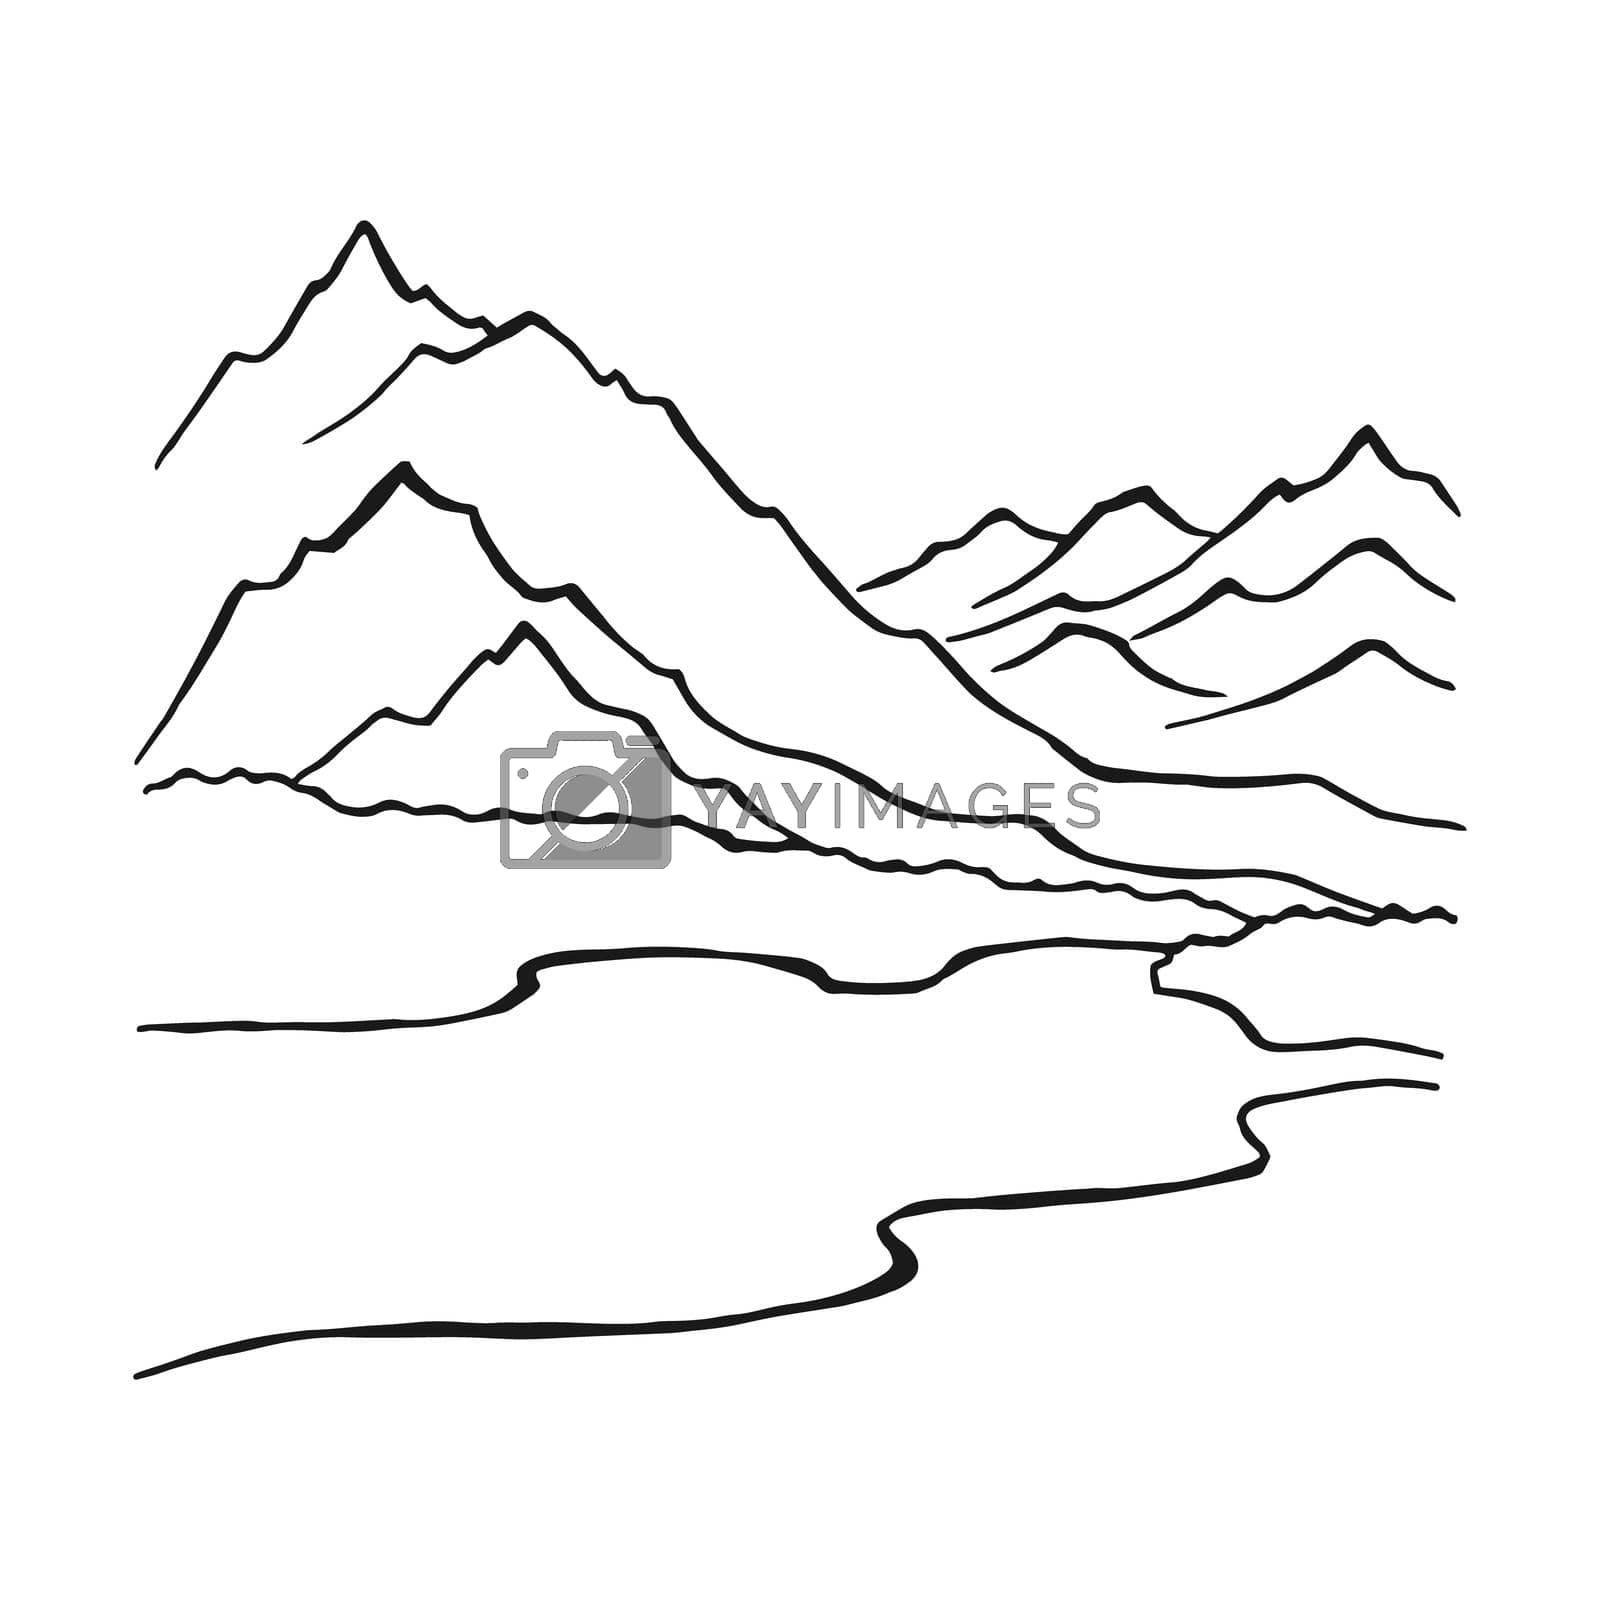 Landscape with mountains and forest. Hand drawn illustration converted to vector.